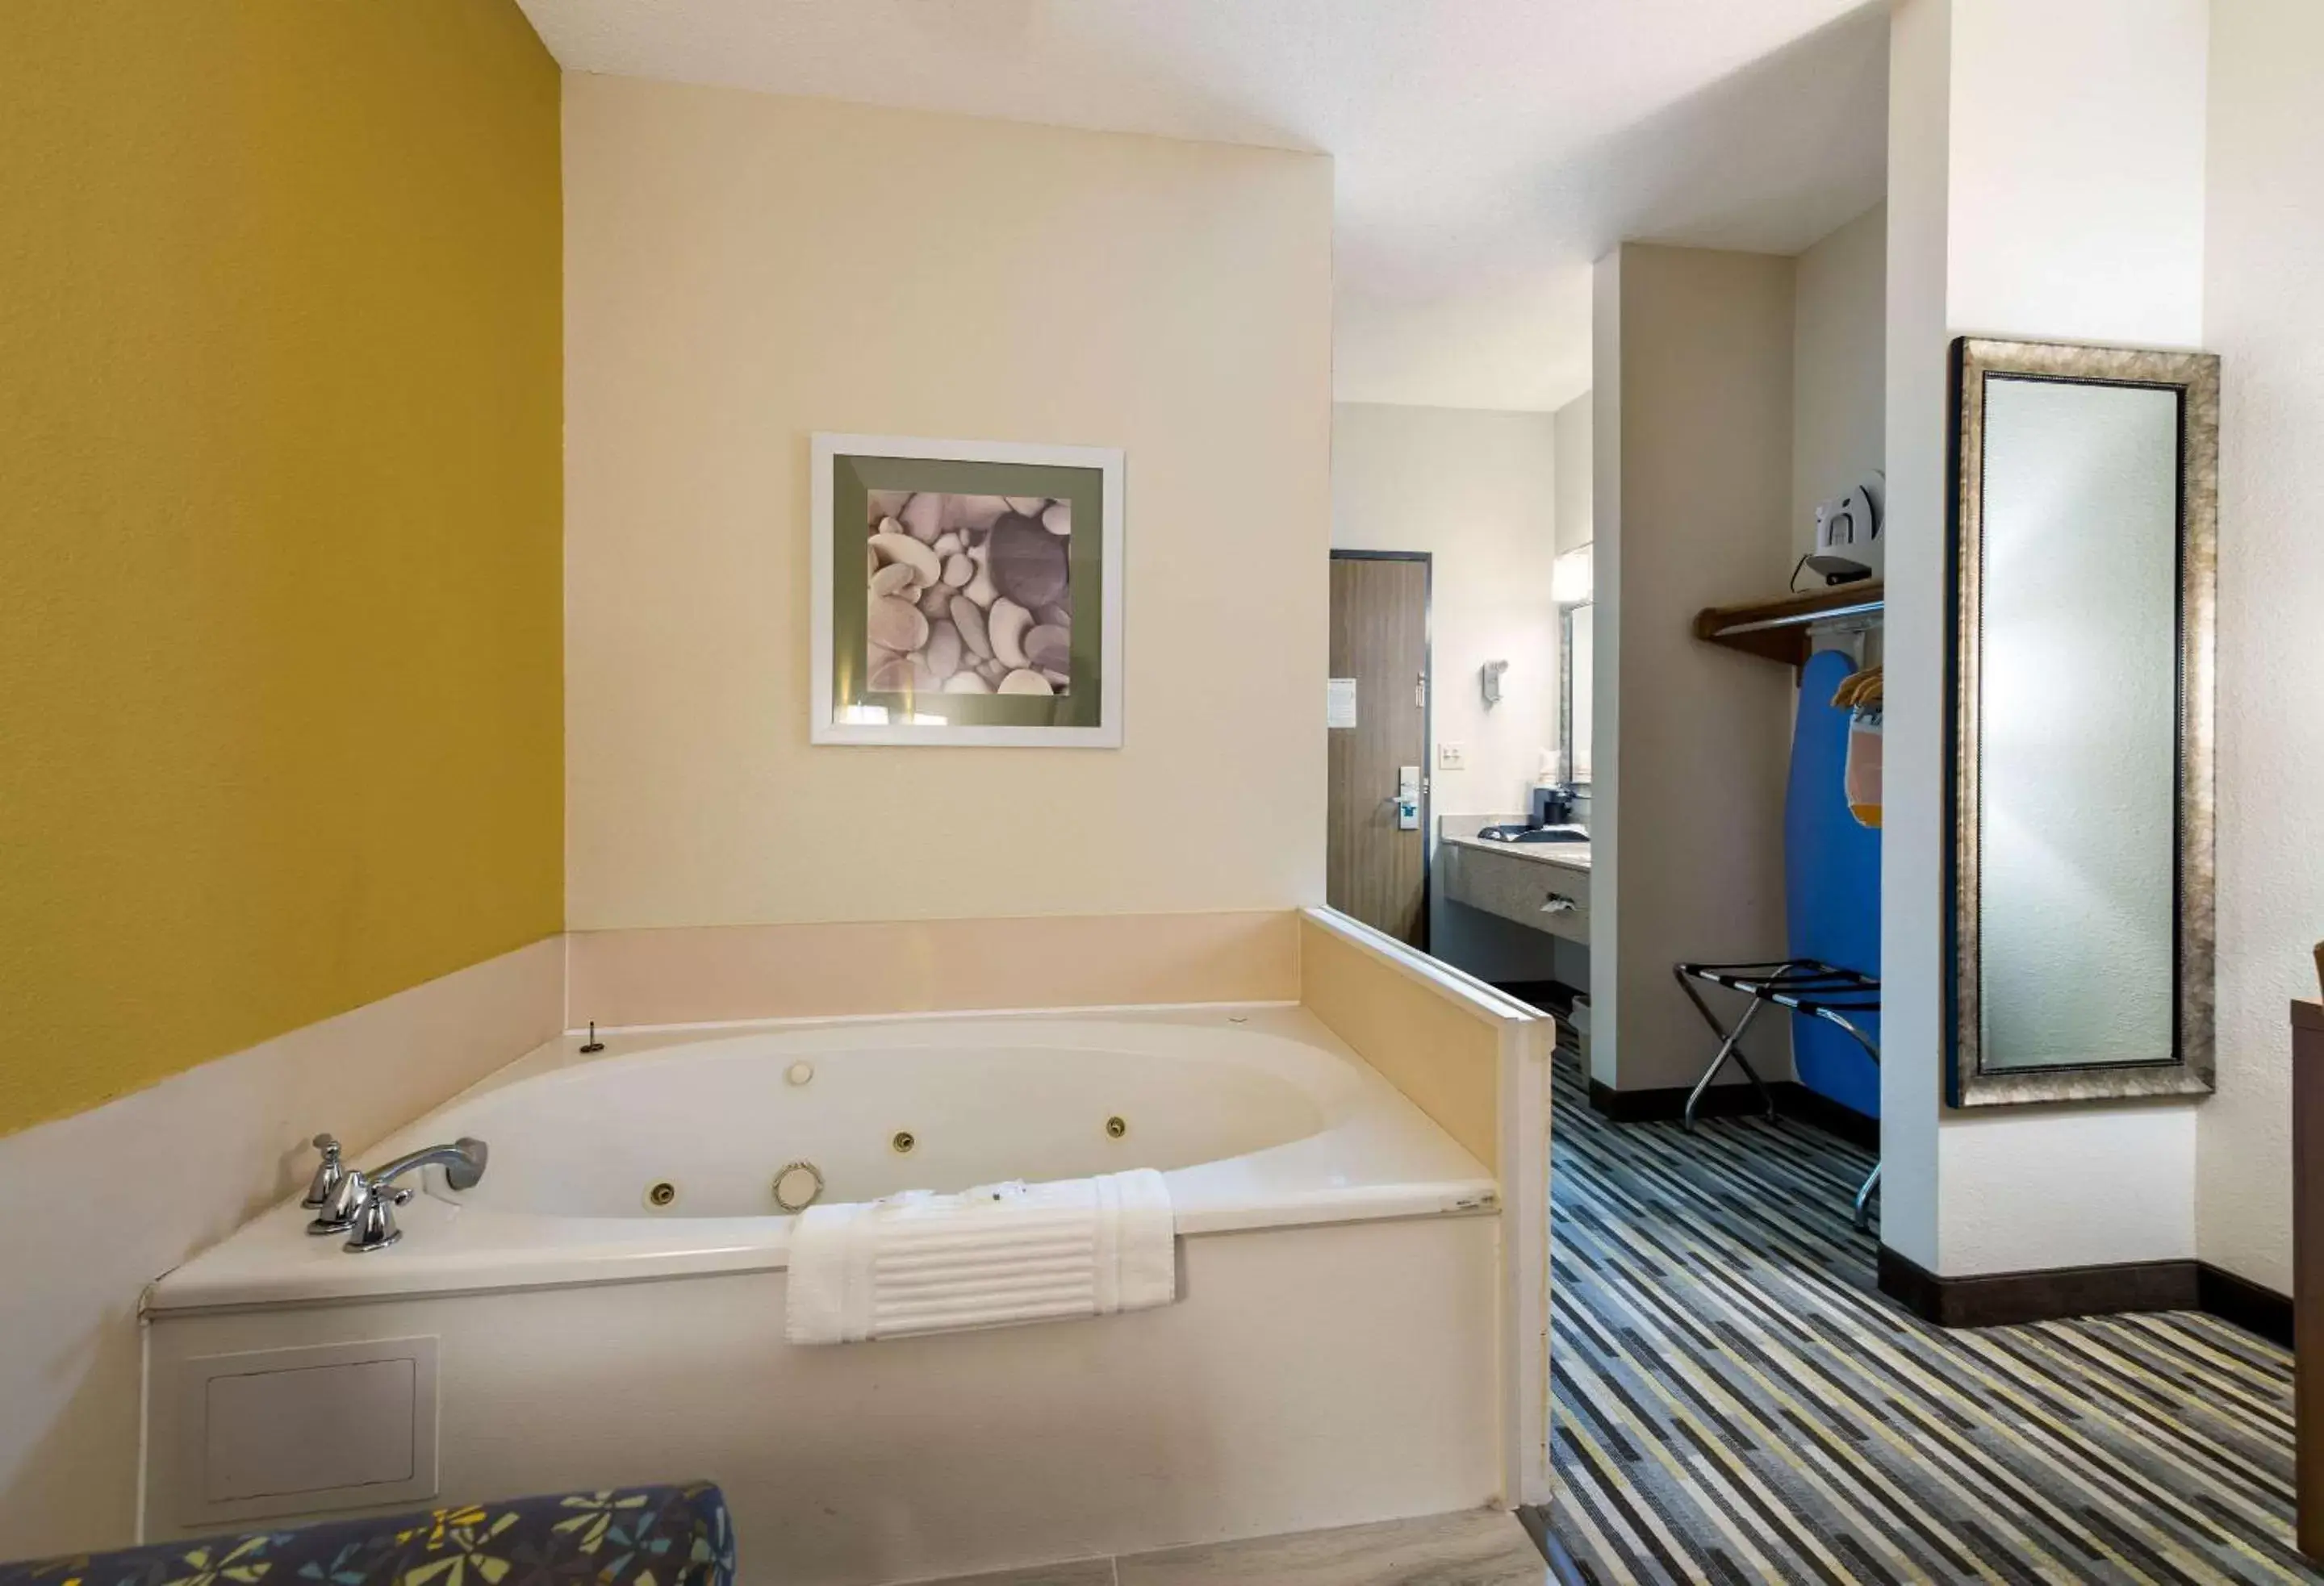 Photo of the whole room, Bathroom in Quality Inn - Michigan City, IN